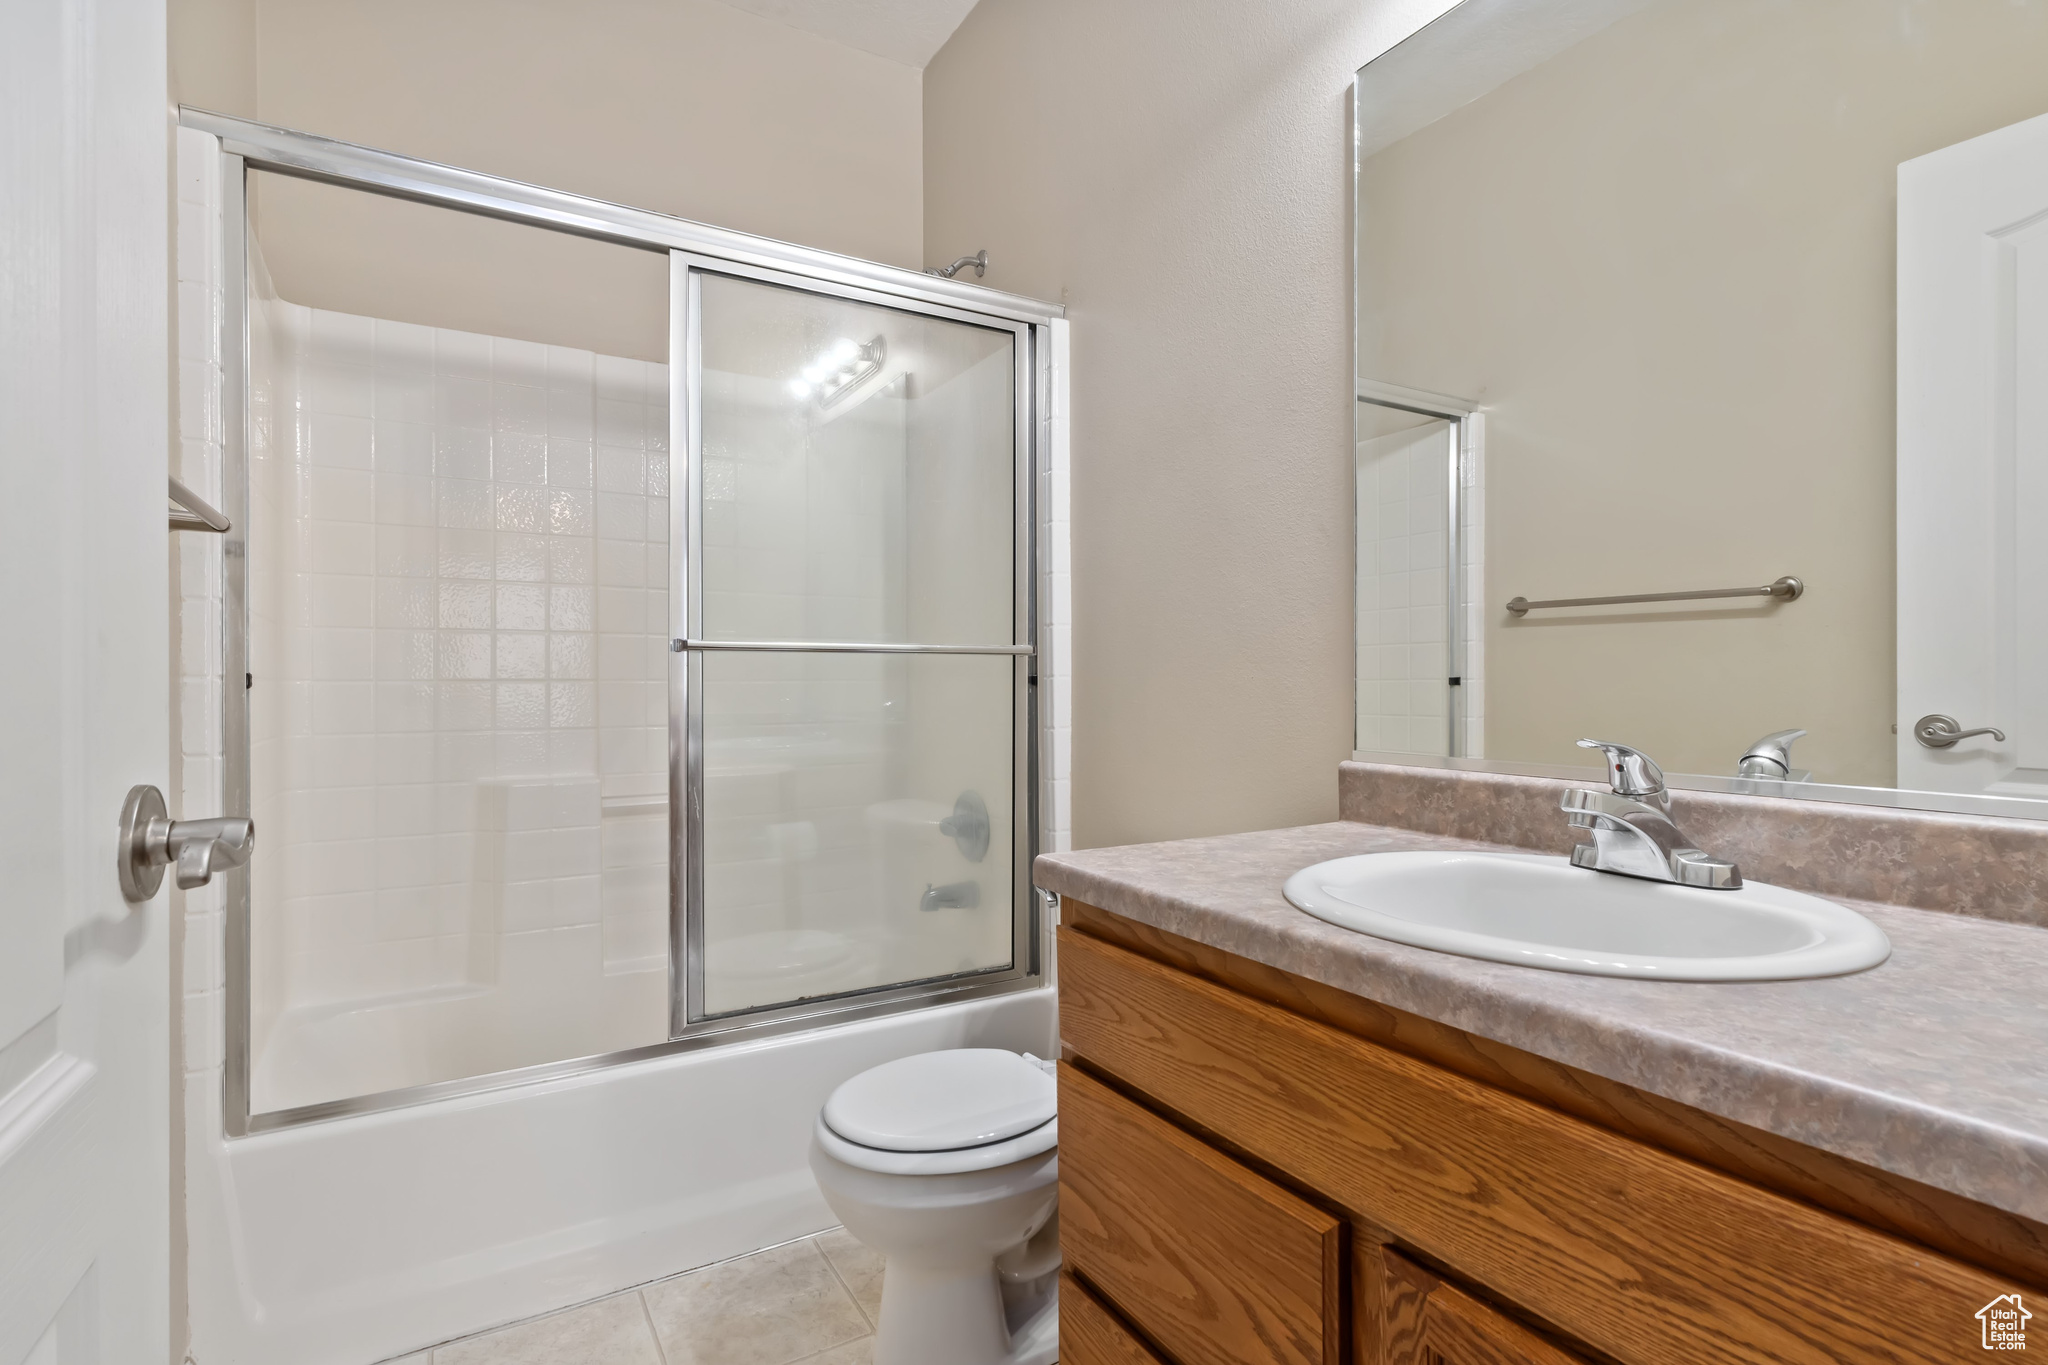 Full bathroom featuring vanity, tile flooring, toilet, and enclosed tub / shower combo